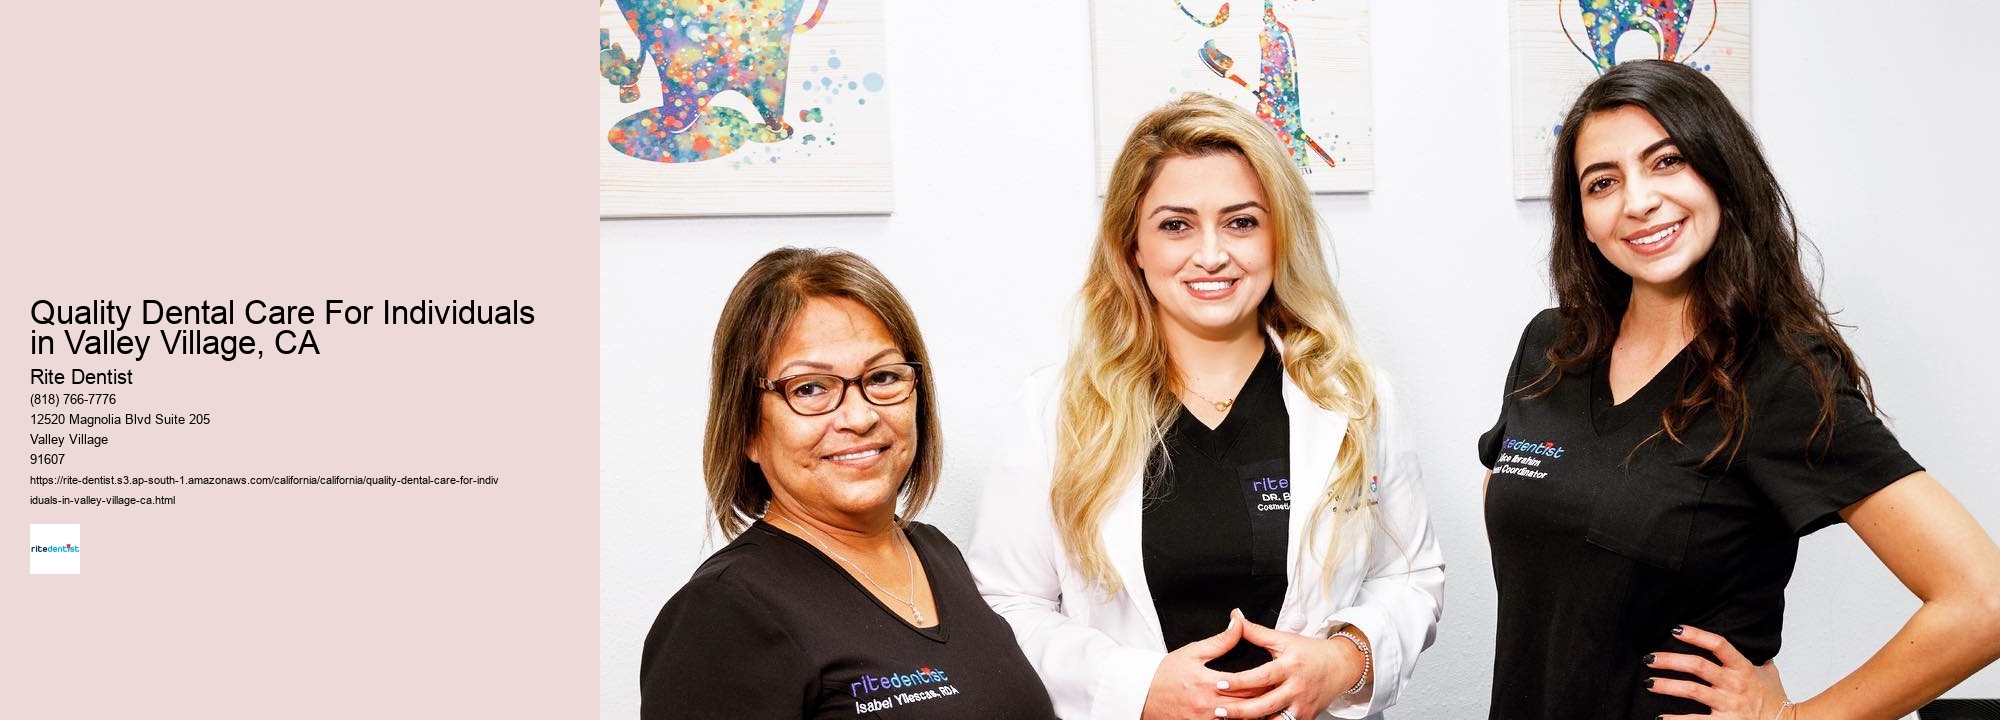 Quality Dental Care For Individuals in Valley Village, CA